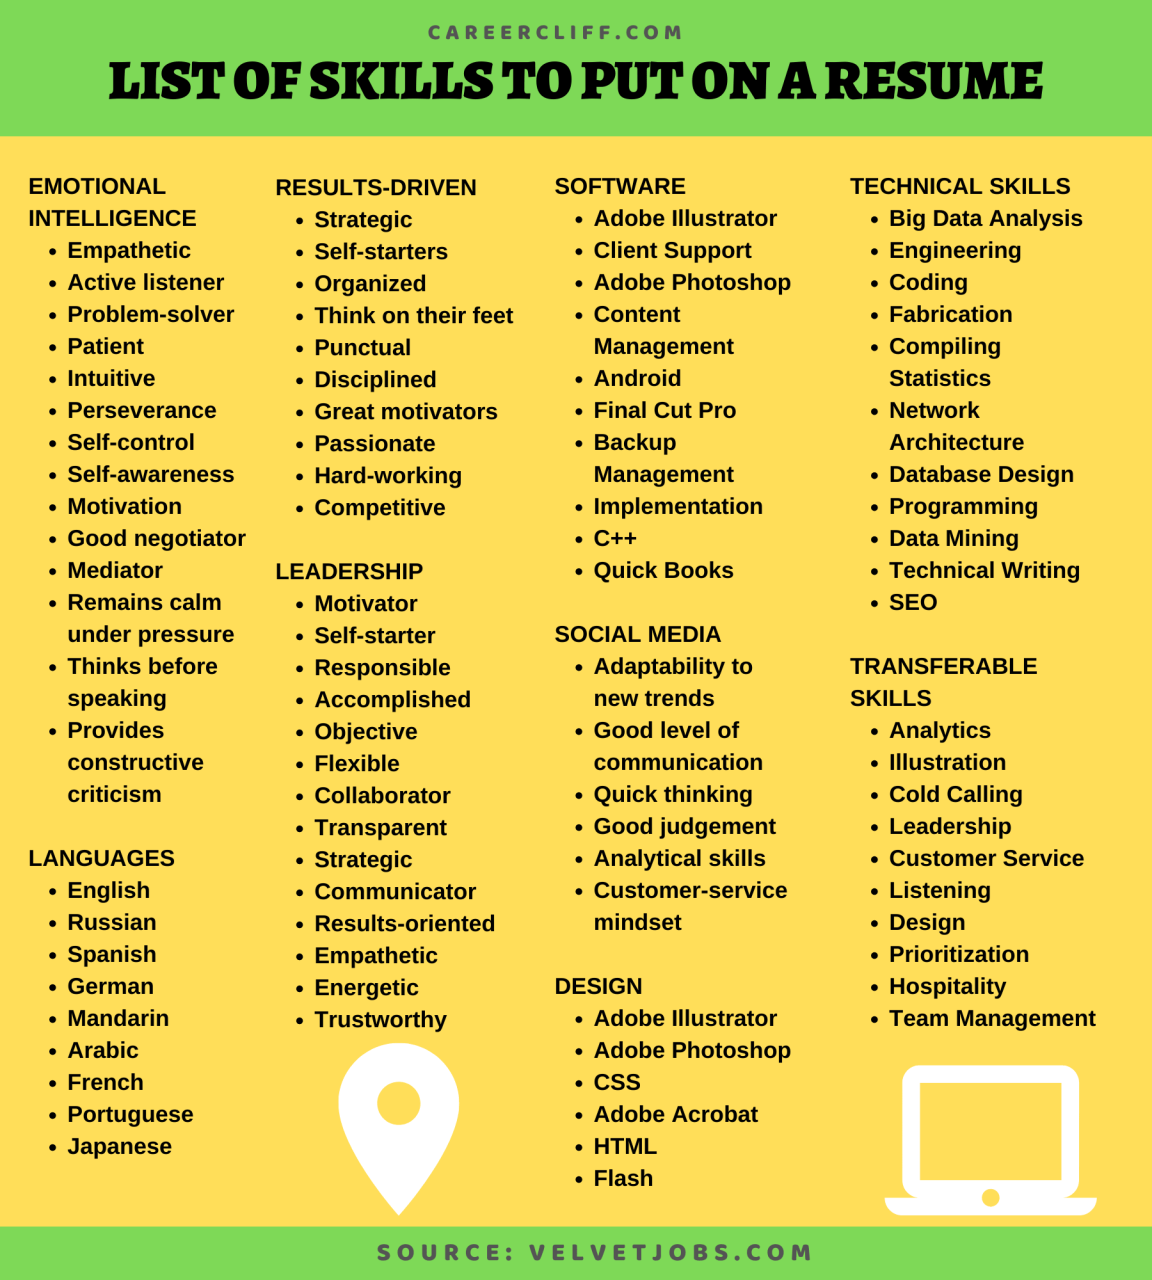 60 List of Skills Put Wisely on a Resume that Others Don't Career Cliff